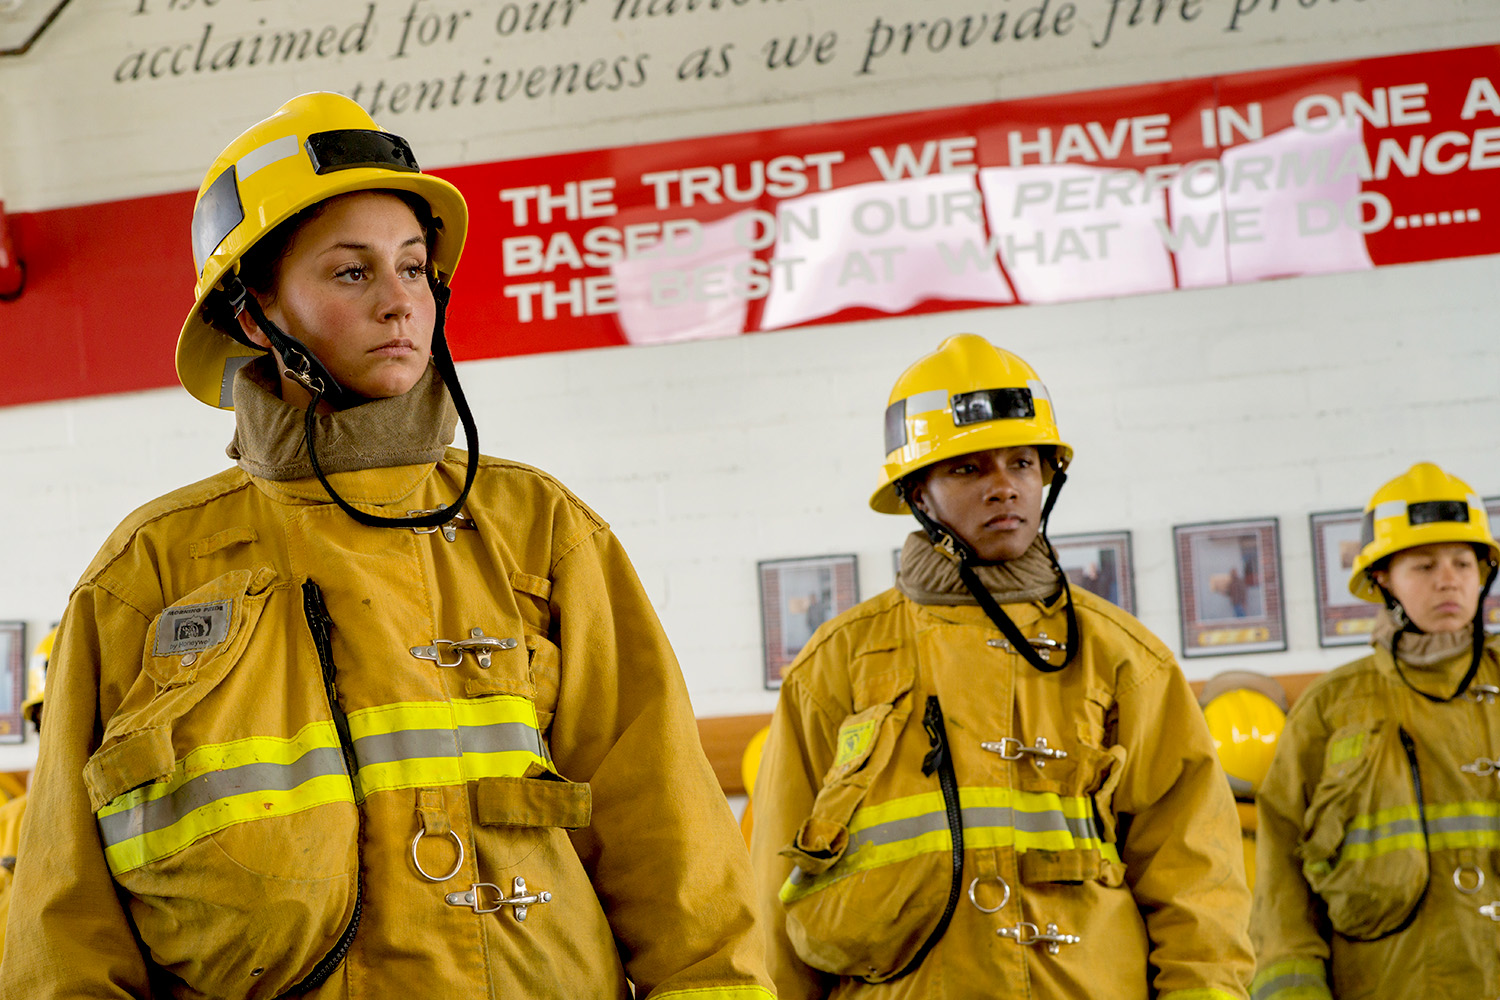 Women fire fighters ready to get to work.